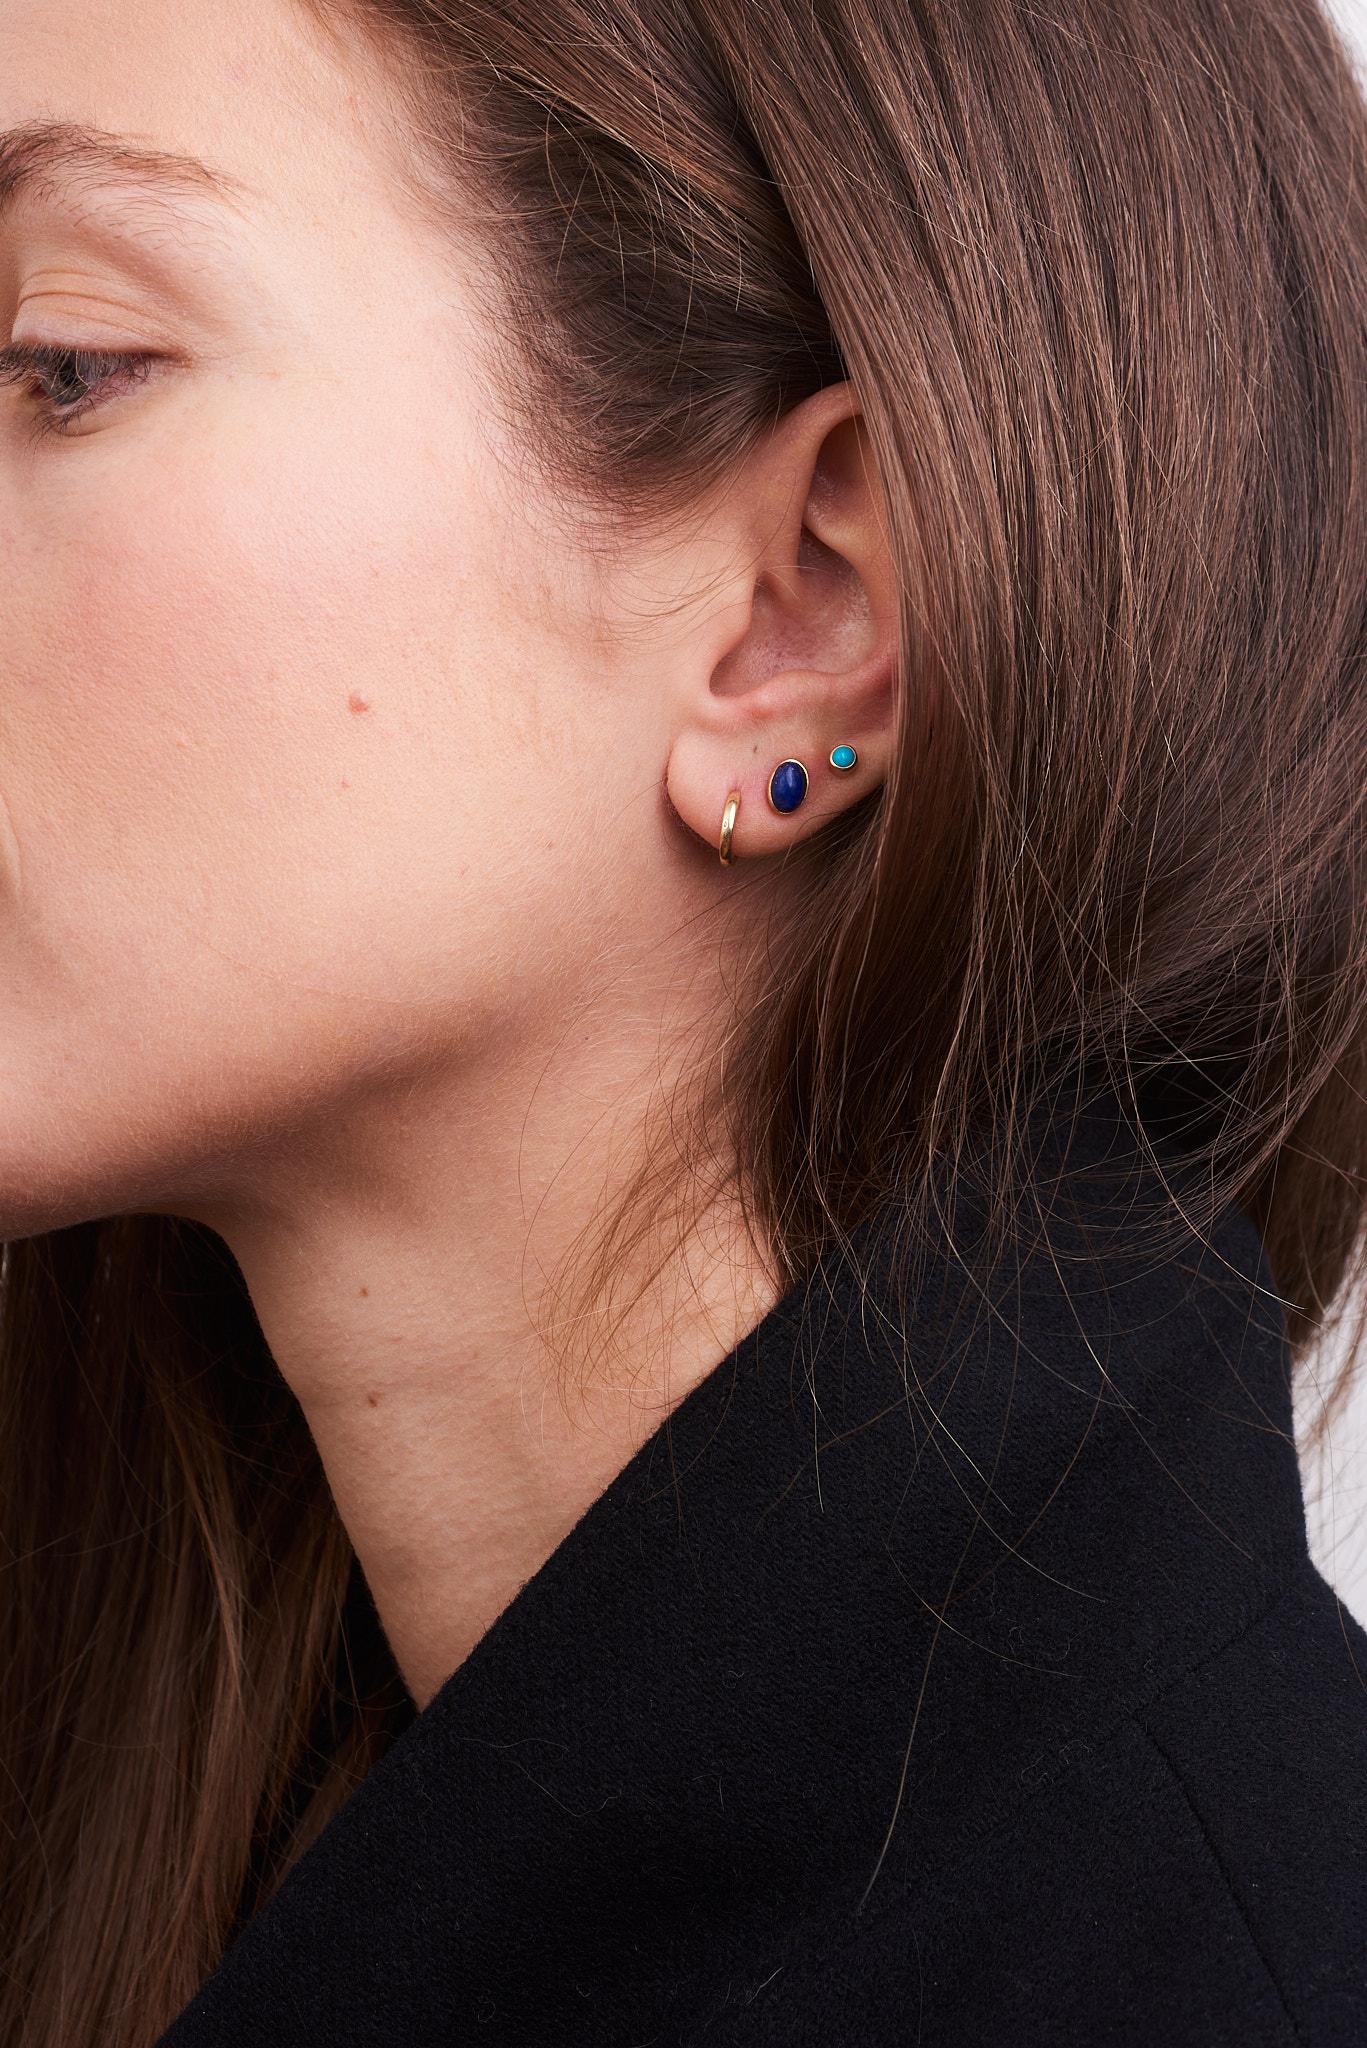 Handcrafted with the most beautiful deep blue genuine lapis stones, these earrings add a pop of deep blue to your wardrobe. They will quickly become a staple in your wardrobe. A simple, timeless statement. 
-14k solid gold
-6x4mm genuine oval lapis